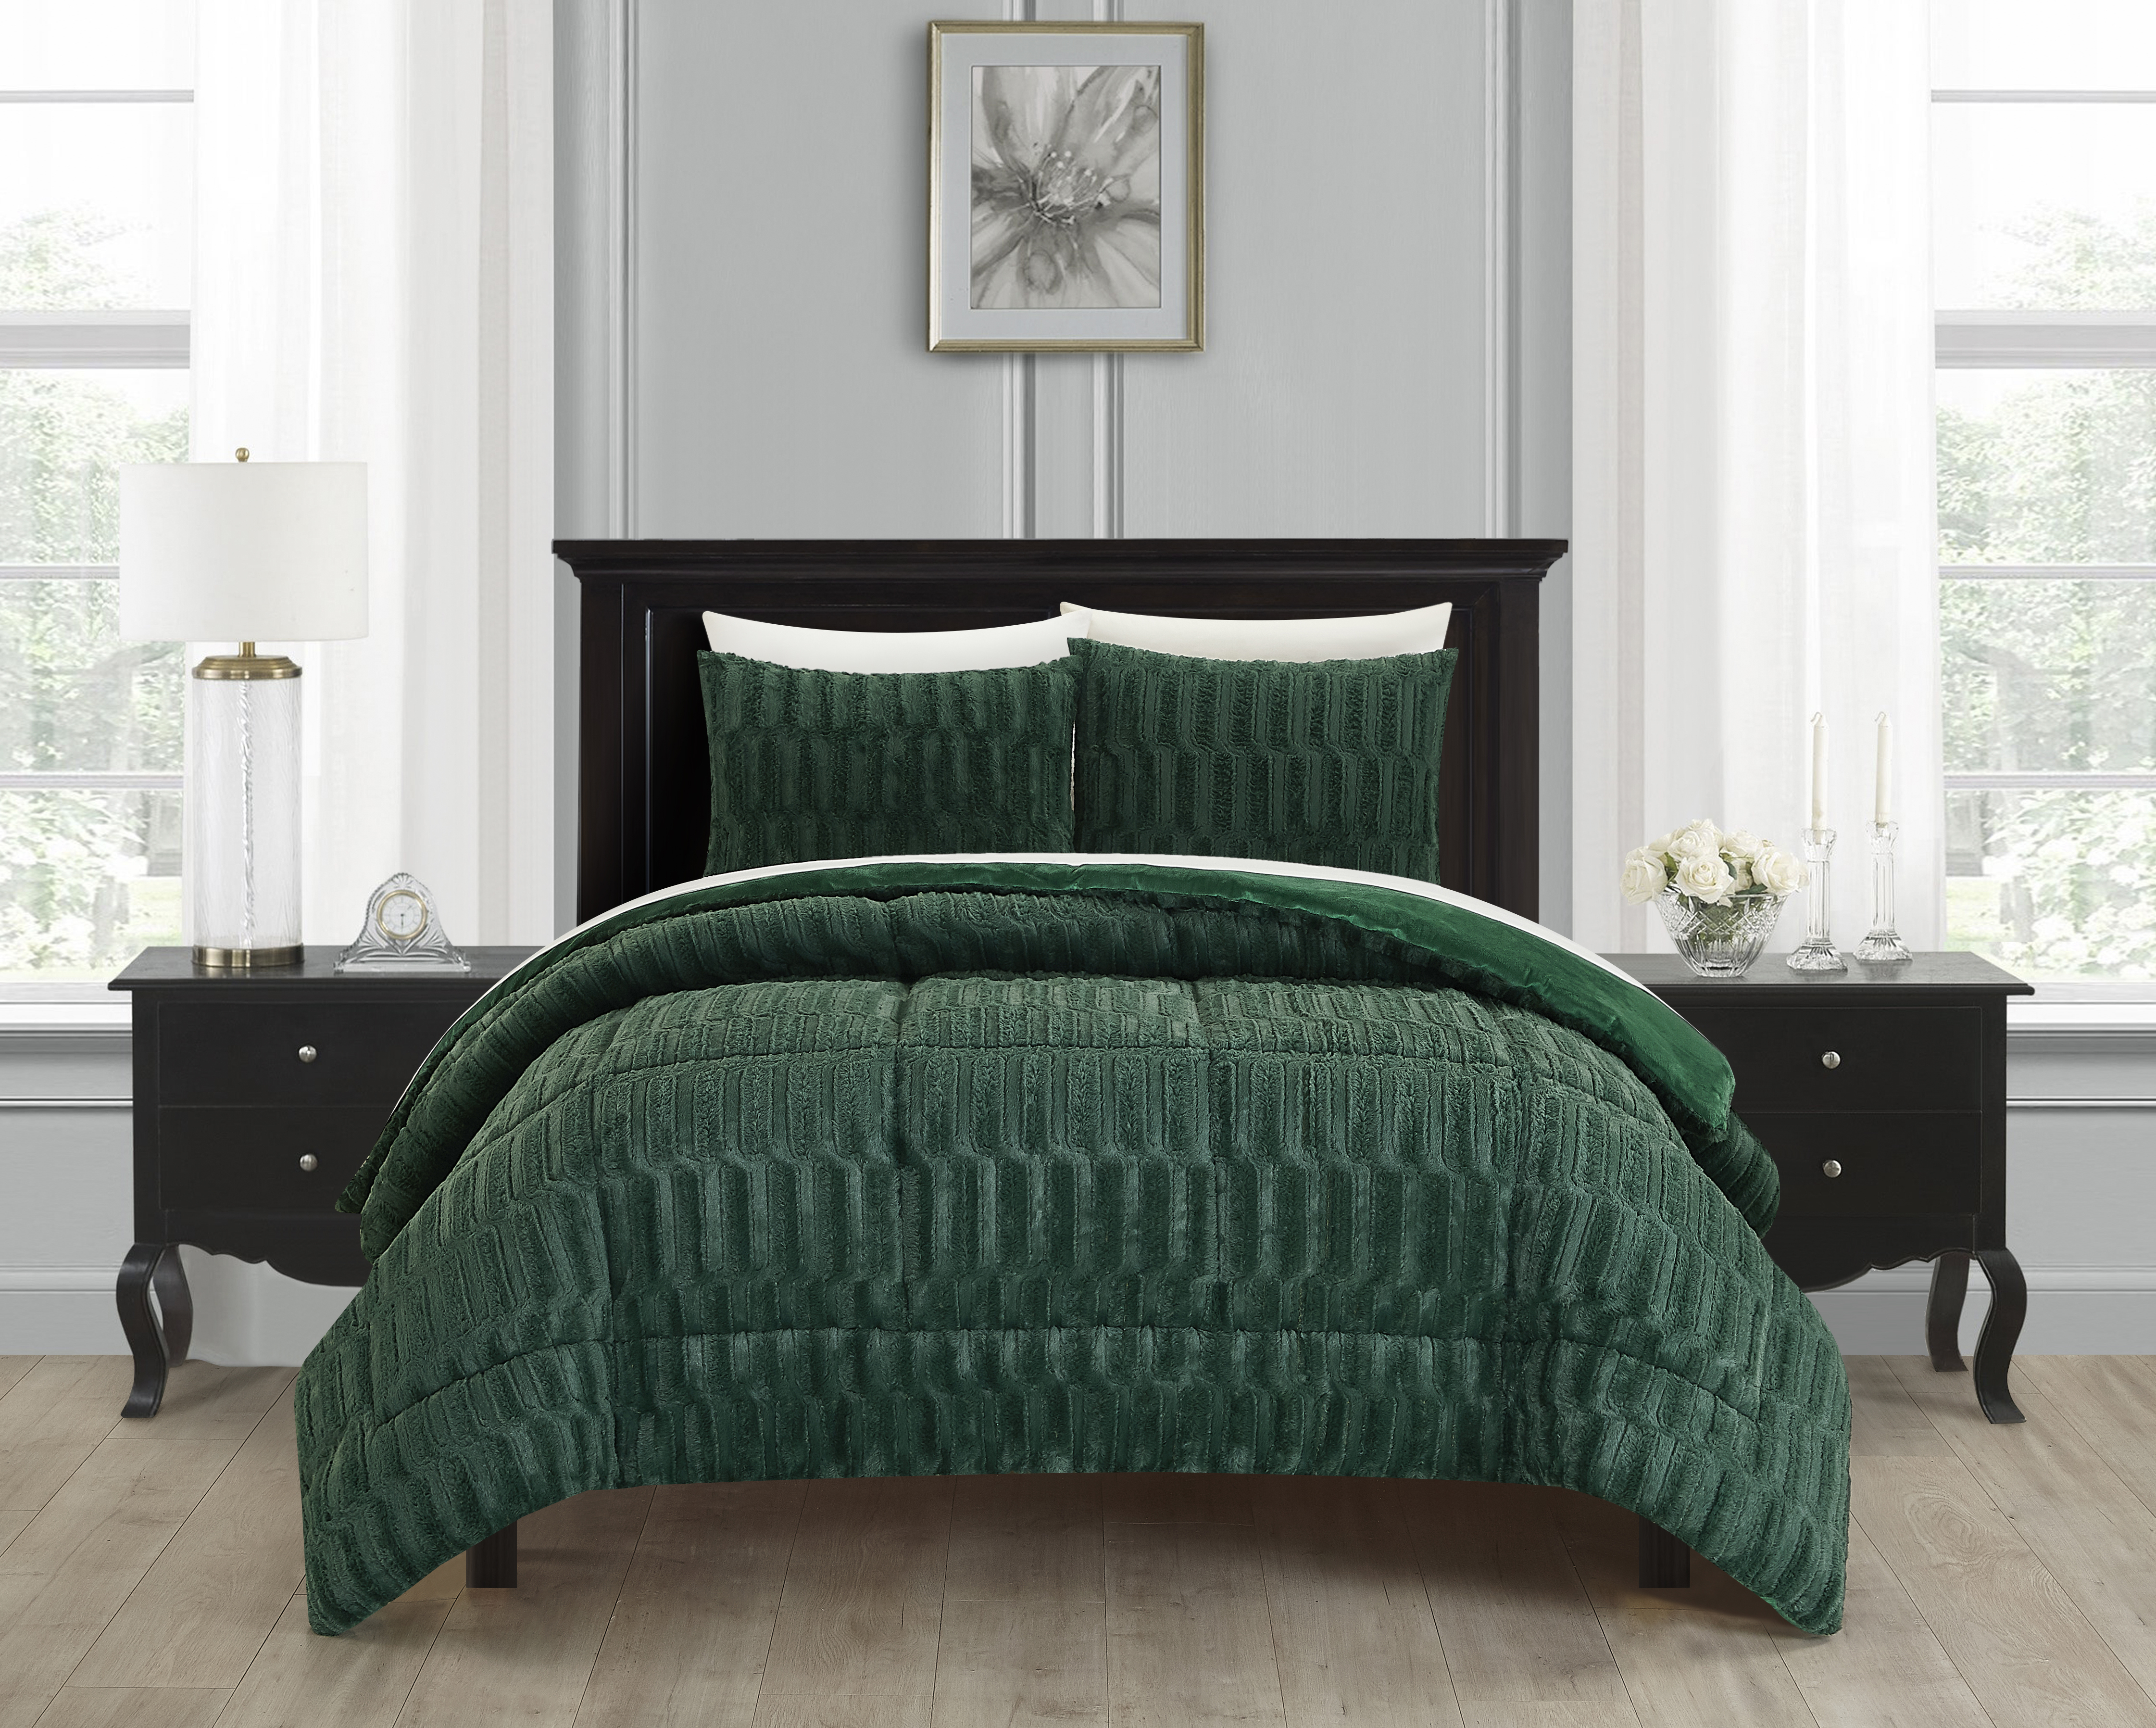 Farca 3 Or 2 Piece Comforter Textured Geometric Pattern Faux Micro-Mink Backing - Green, Queen - 3 Piece